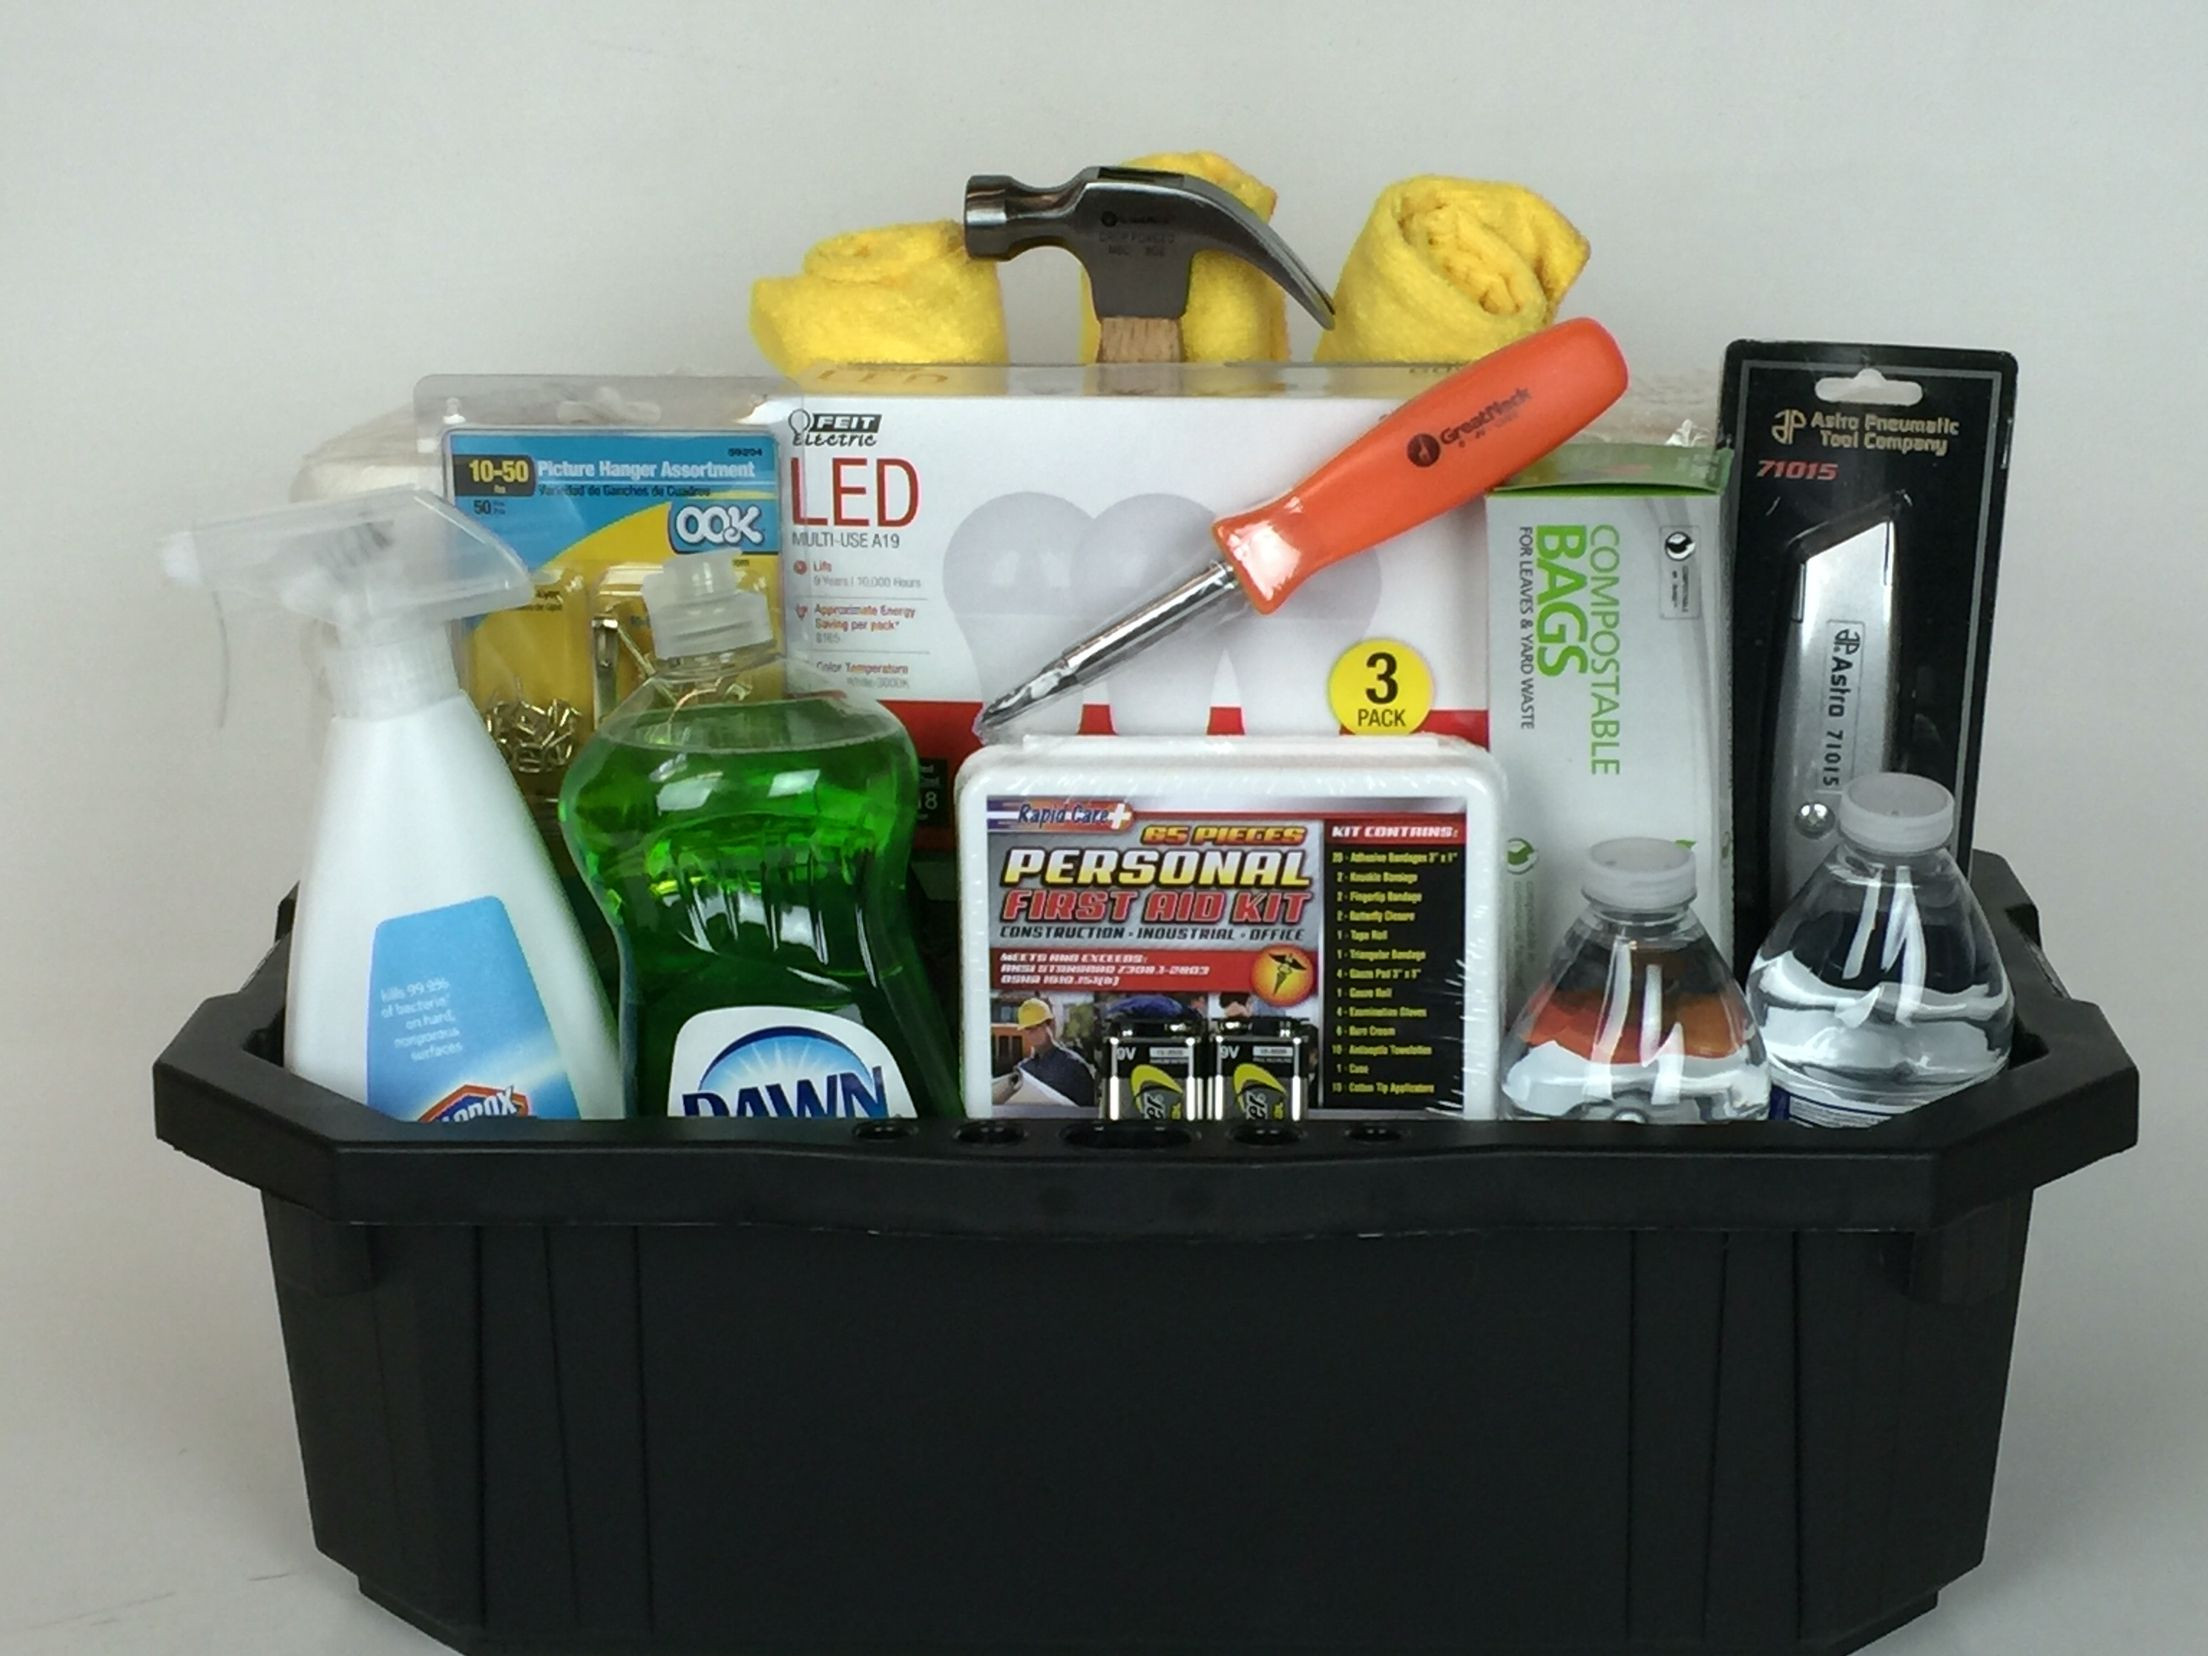 New Homeowner Gift Basket Ideas
 GIFT BASKETS BY THE 1000 s For all the new homeowners